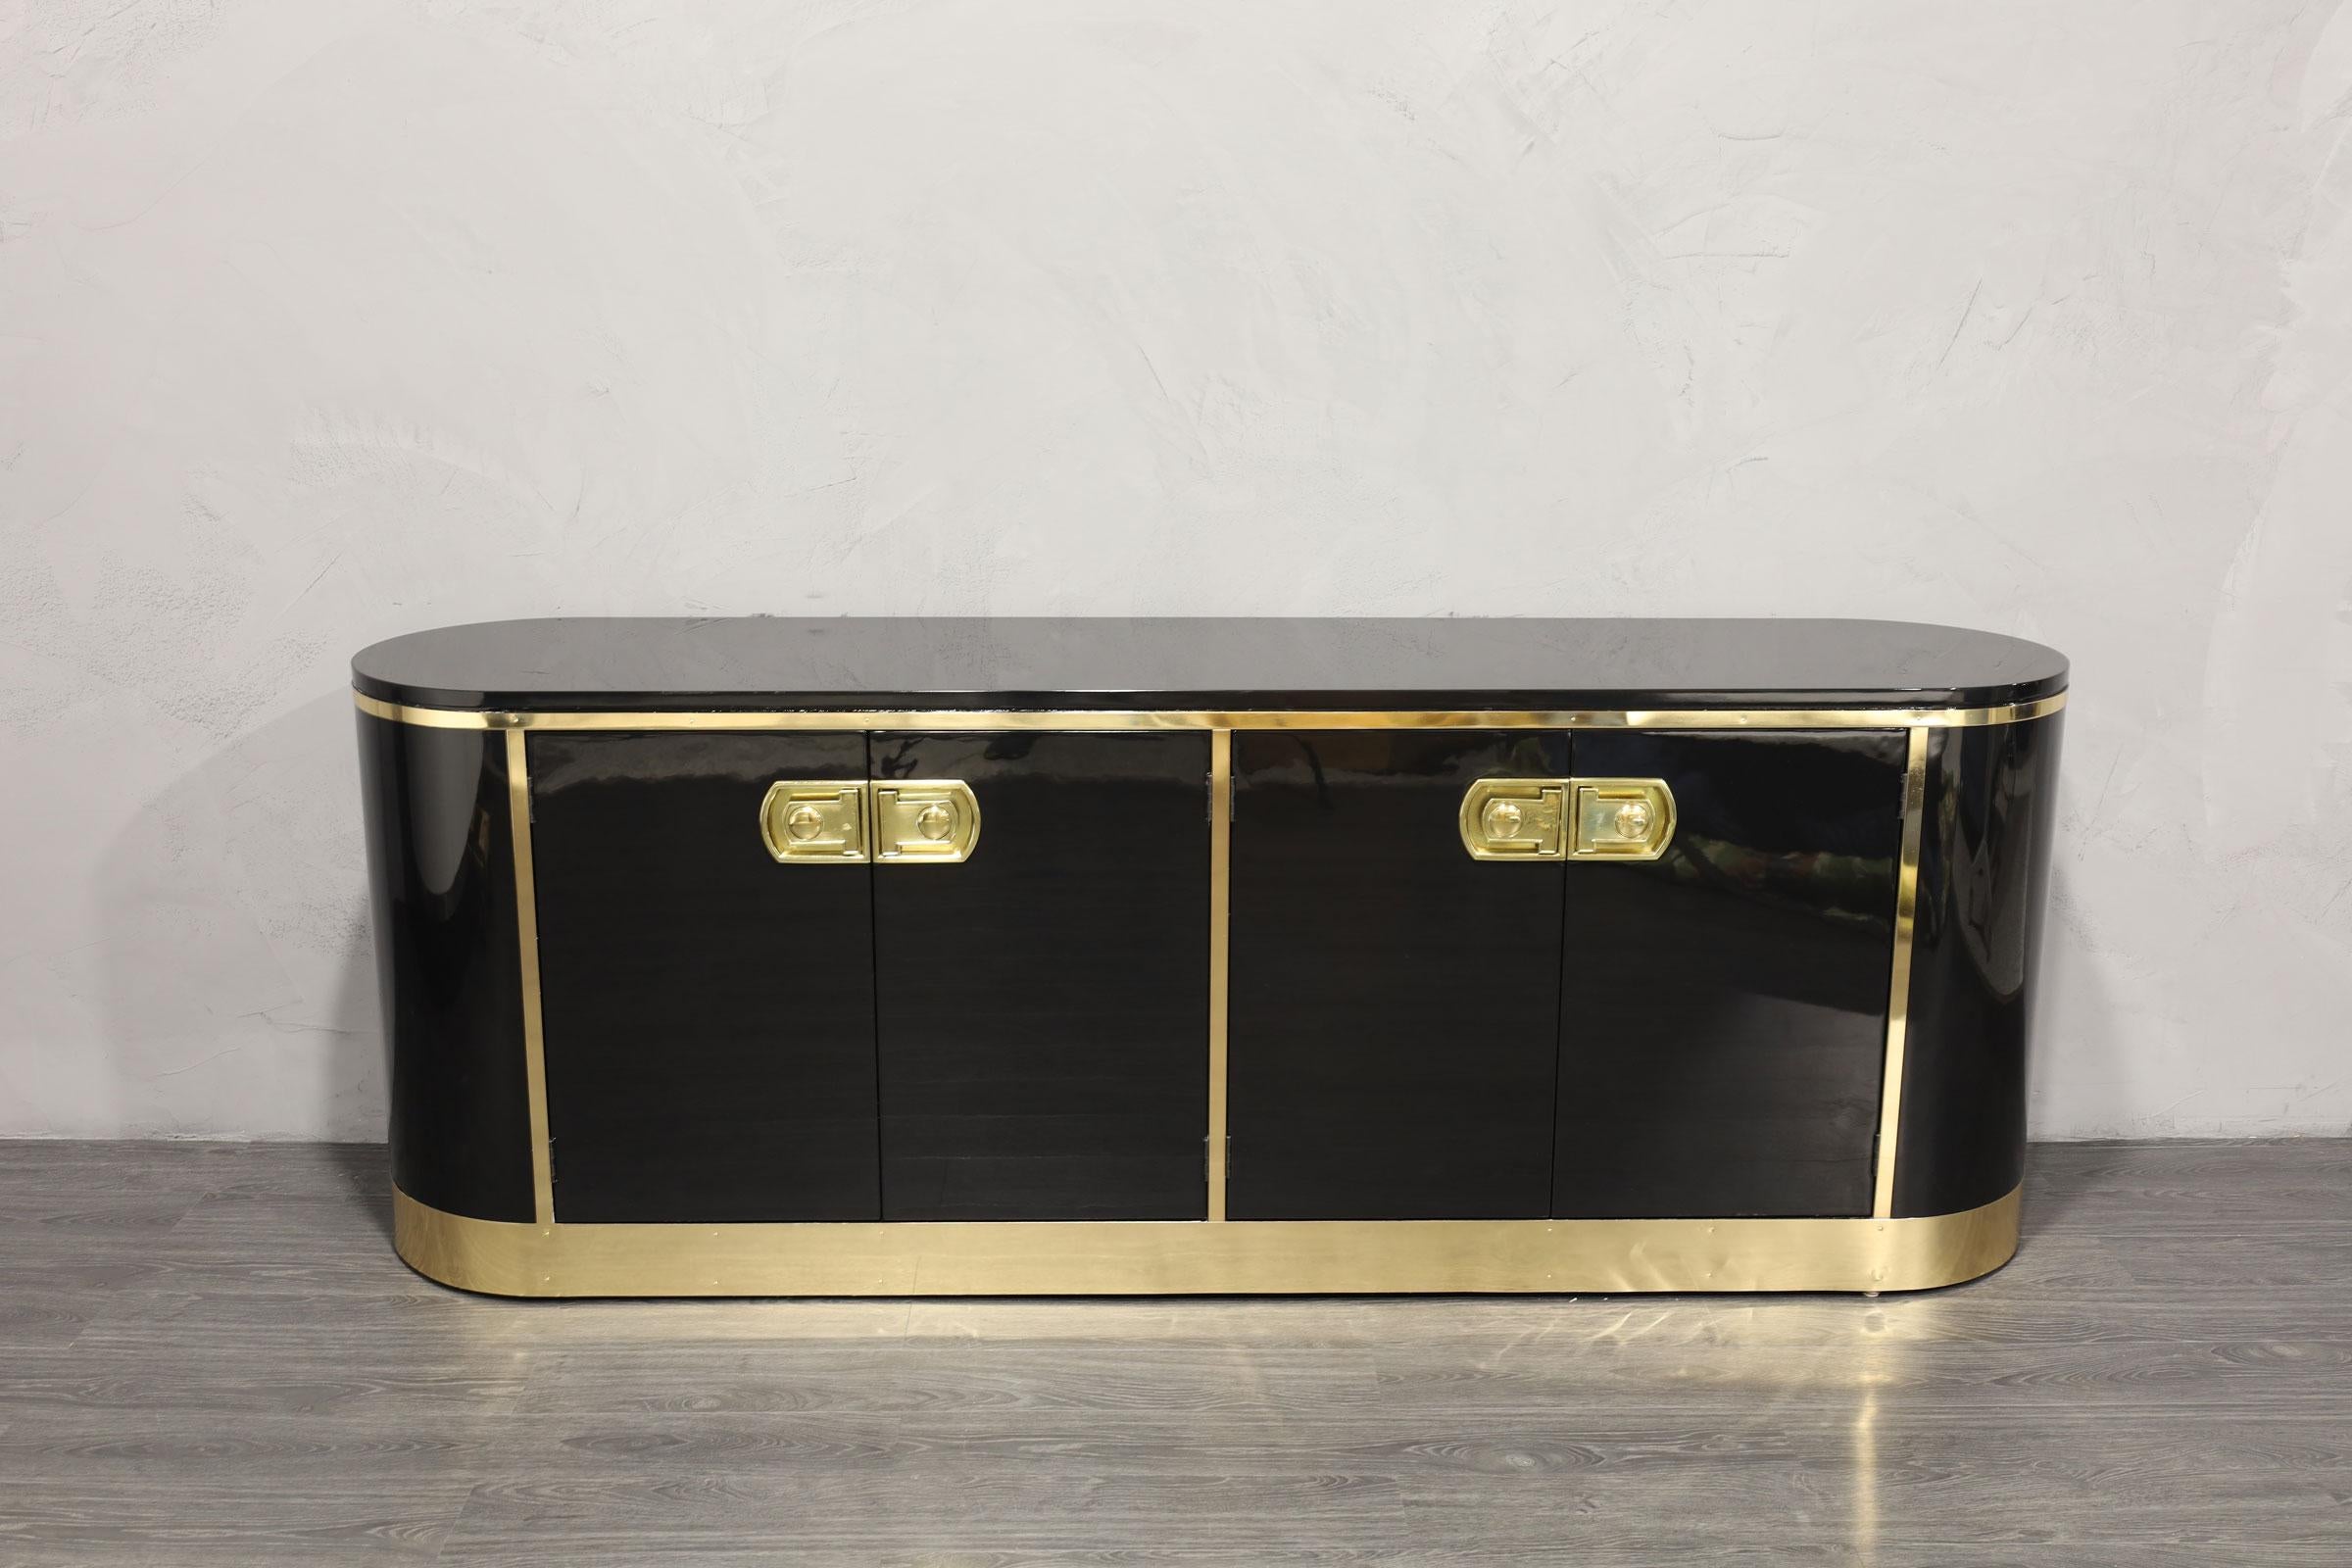 A beautifully restored sideboard by Mastercraft. It is pill shaped and an iconic design. This is a high gloss black lacquer with shelving on one side and four drawers on the other side. Brass trim that has been expertly polished and sealed so it